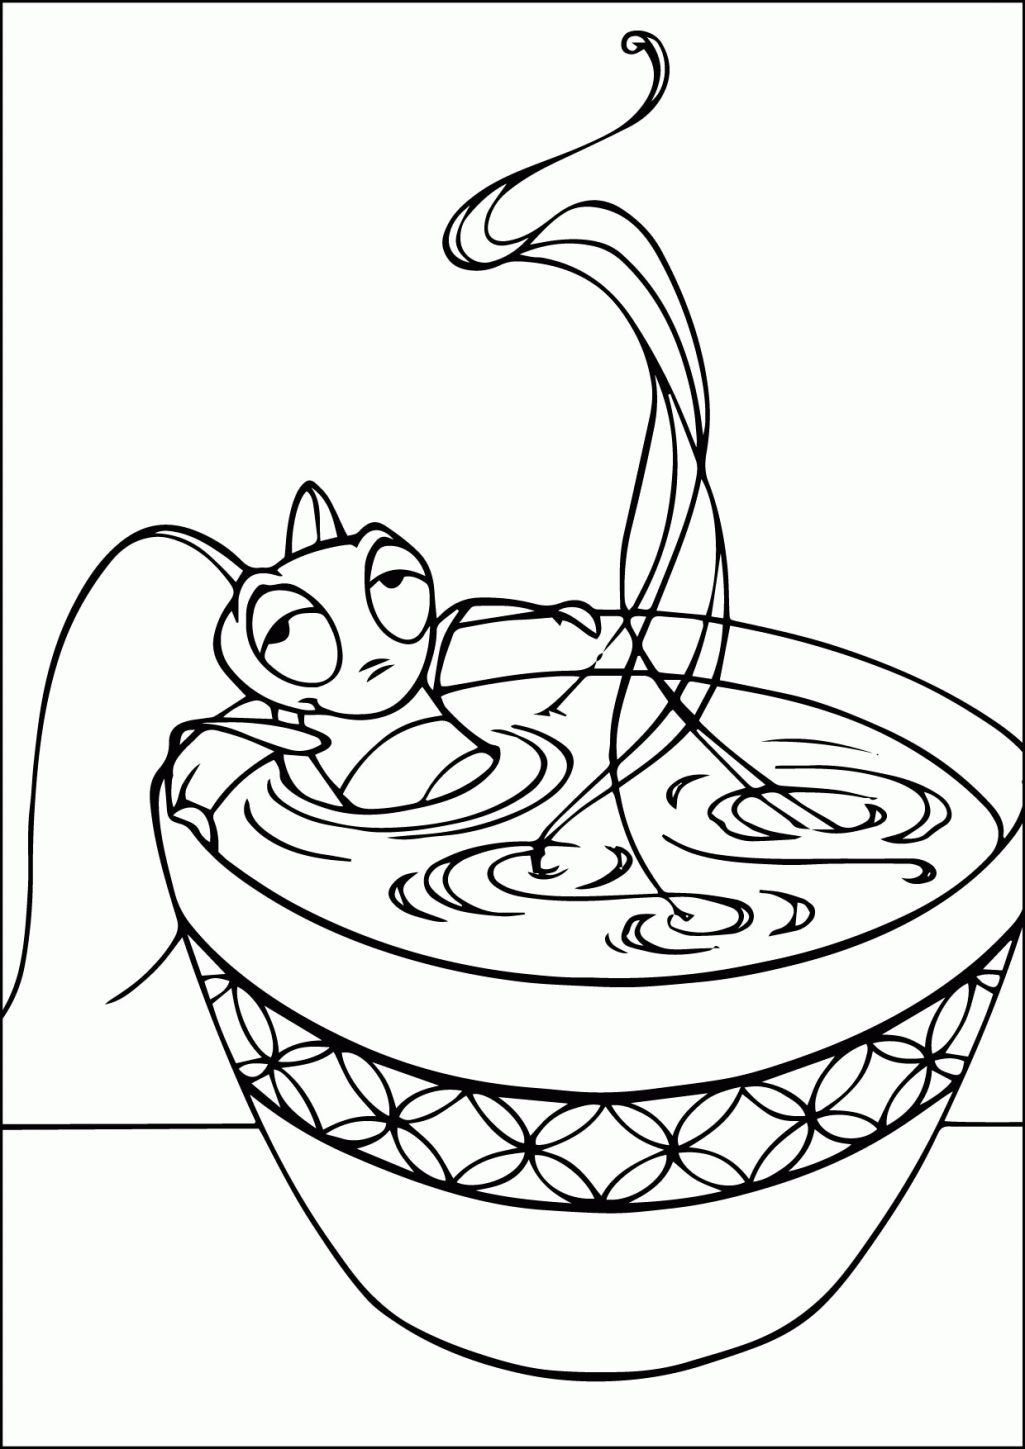 Free Coloring Pages Of Cute Qoutes Cute Coloring Pages For Your